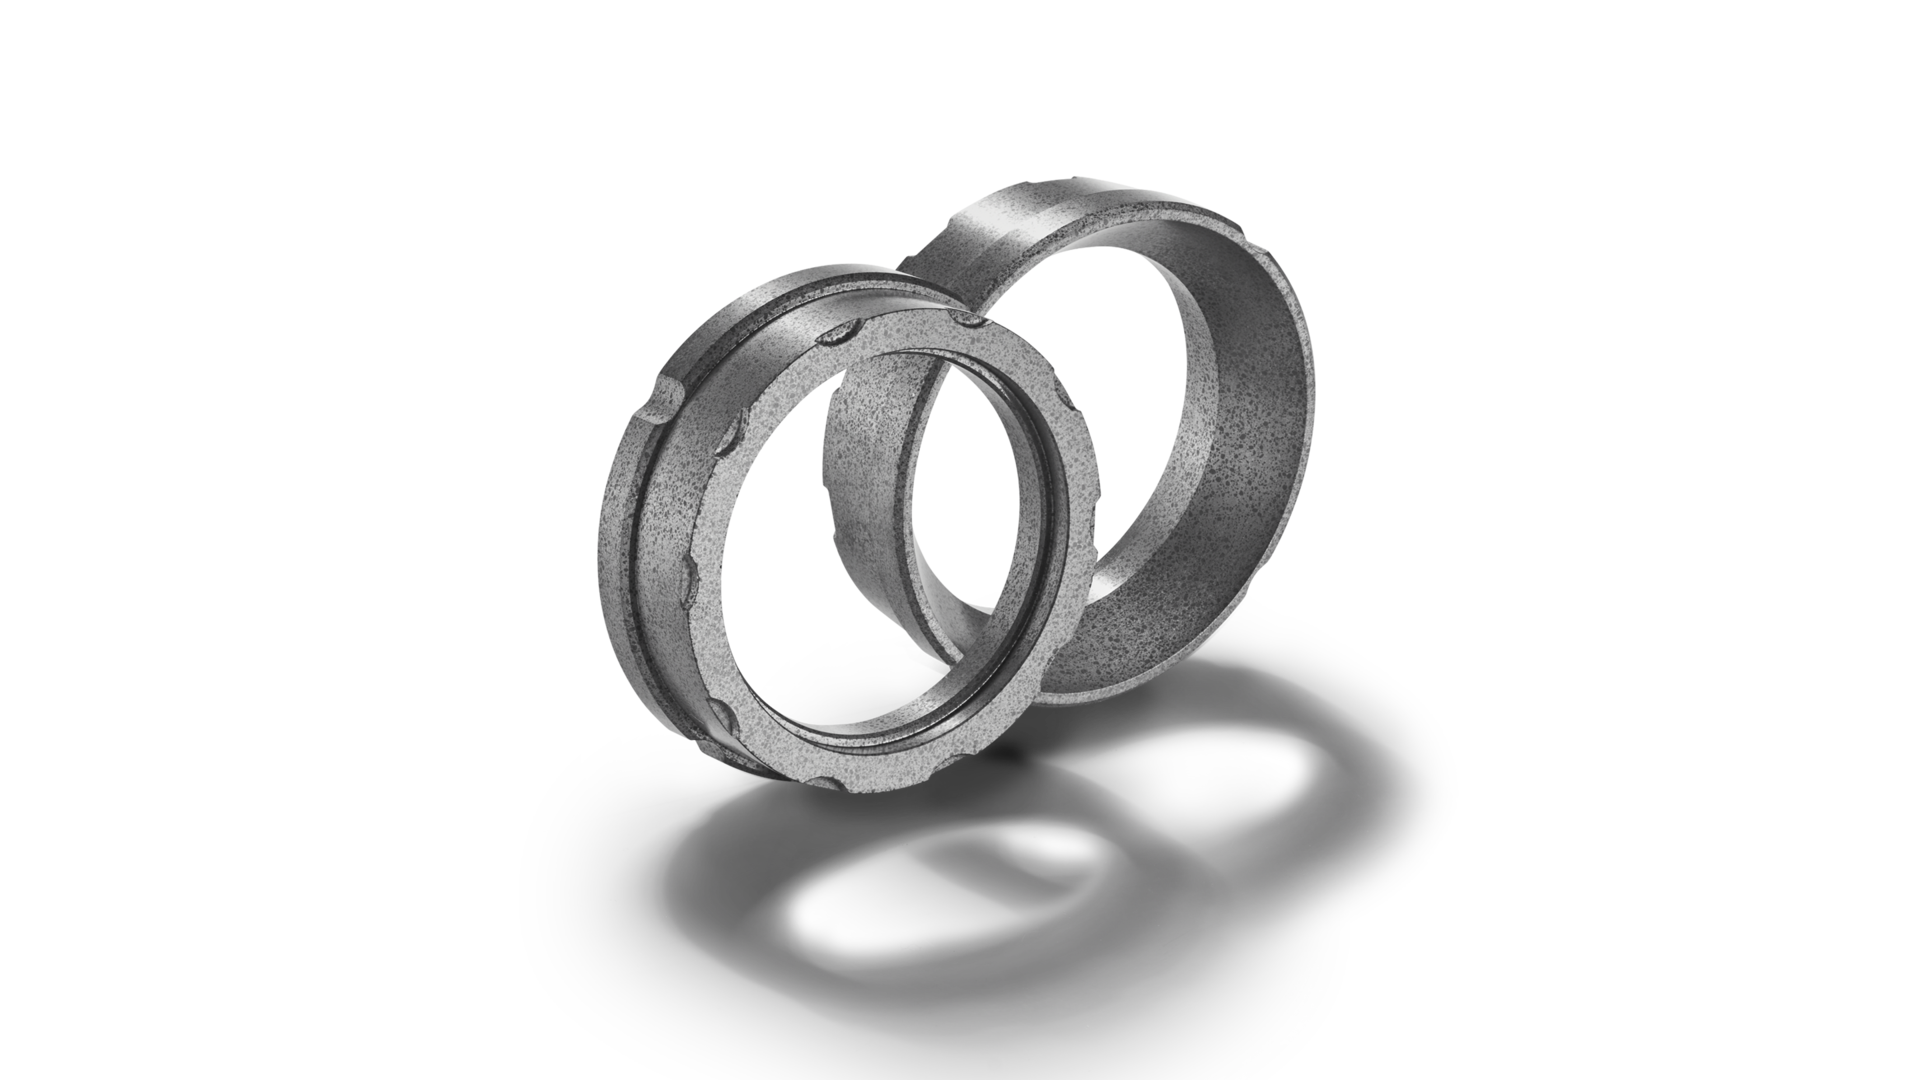  Pair of seal rings made of reaction-bonded silicon carbide, branded es CarSIK-CT by Schunk 